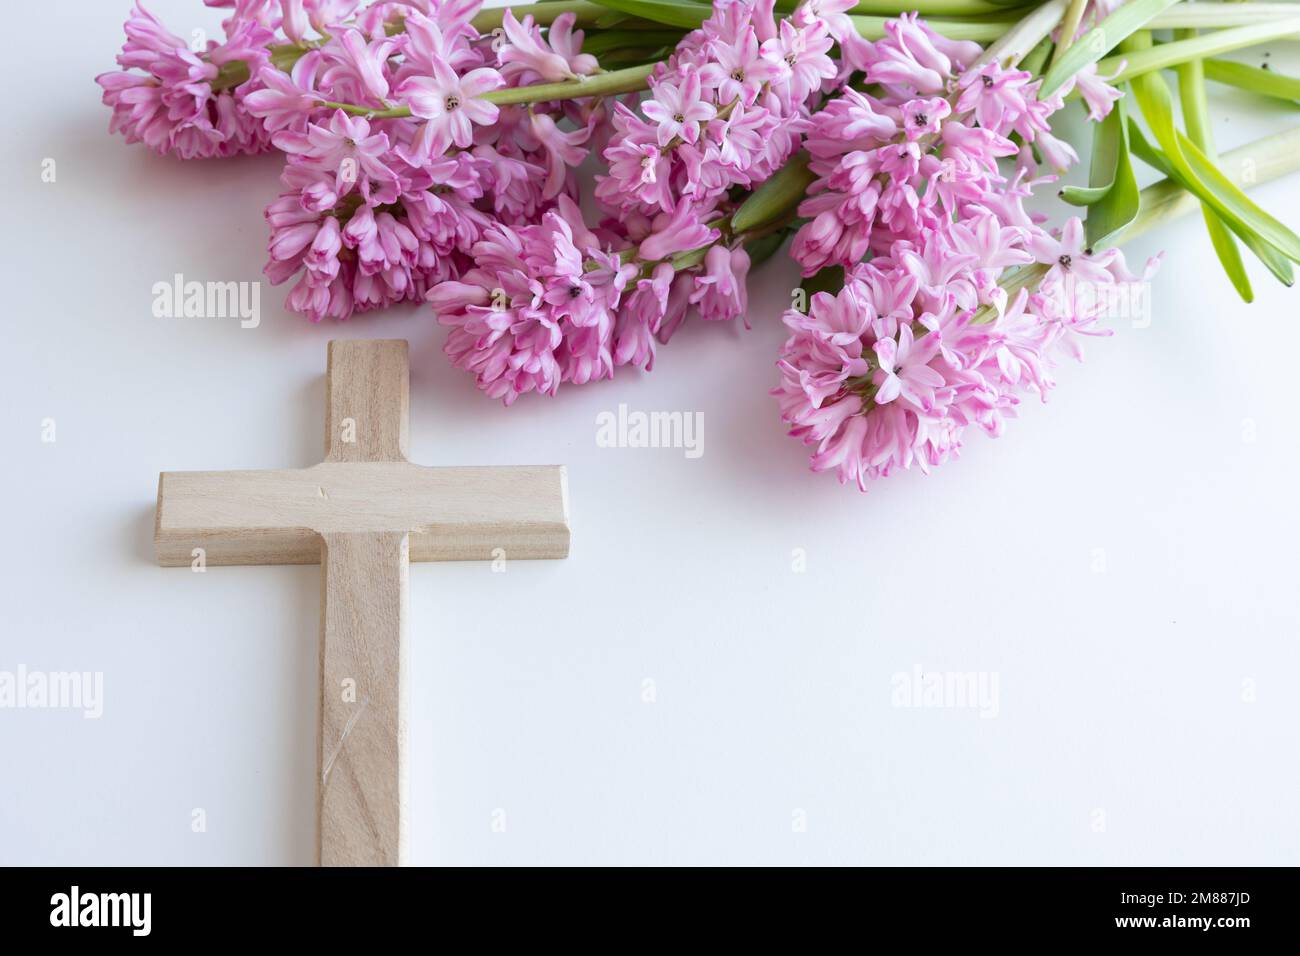 Simple wood Christian cross on a white background with a bouquet of pink hyacinth flowers as a border with copy space Stock Photo